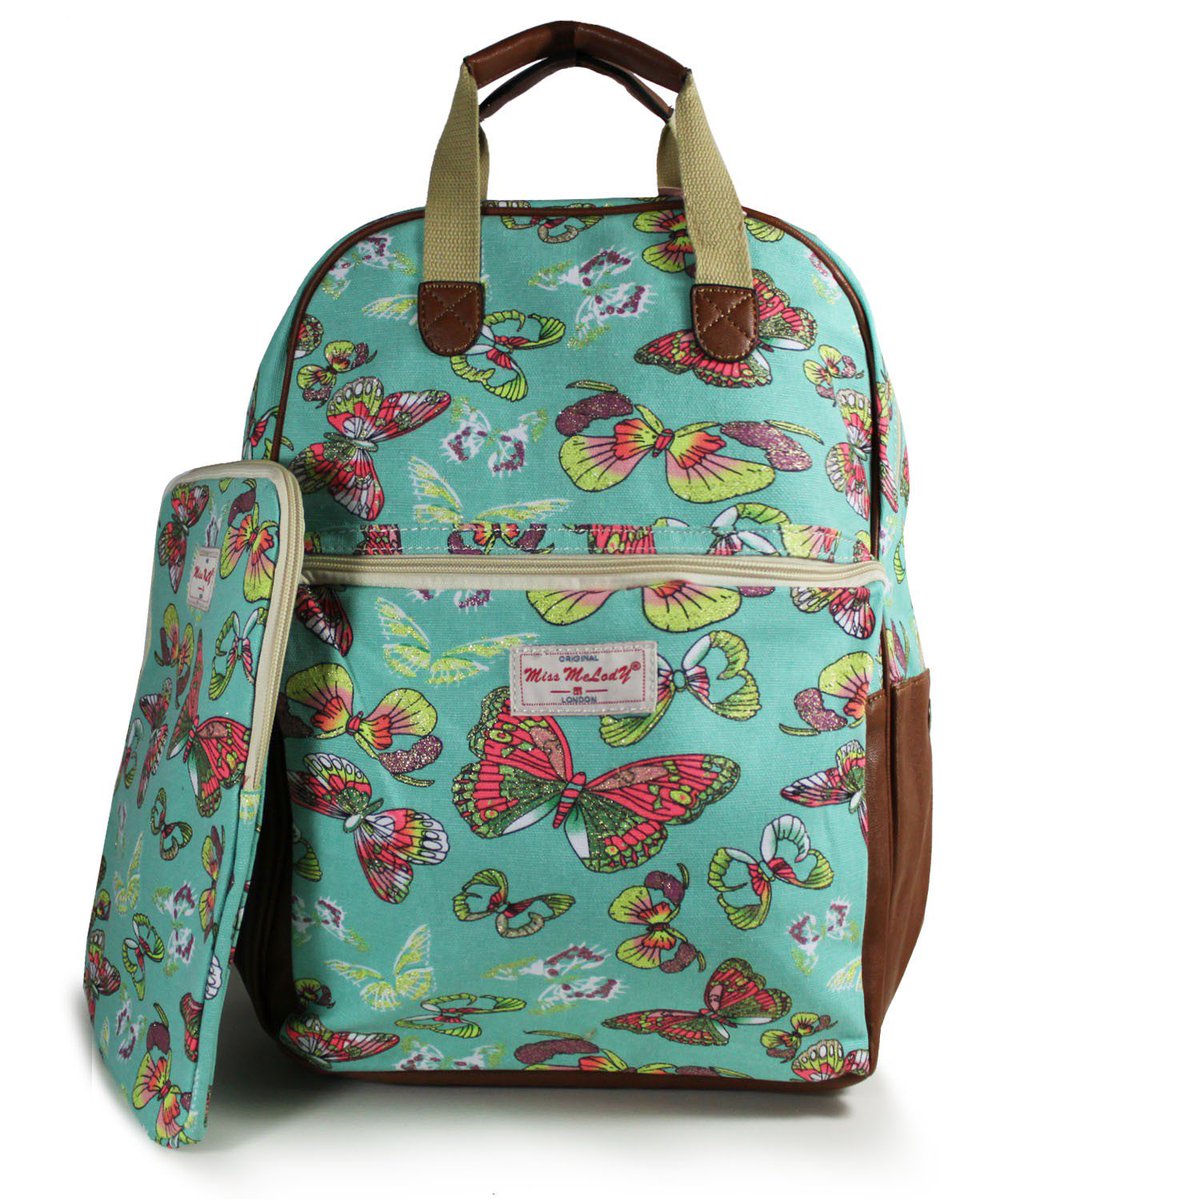 Debut- Ed’s Fashions Butterfly green backpack